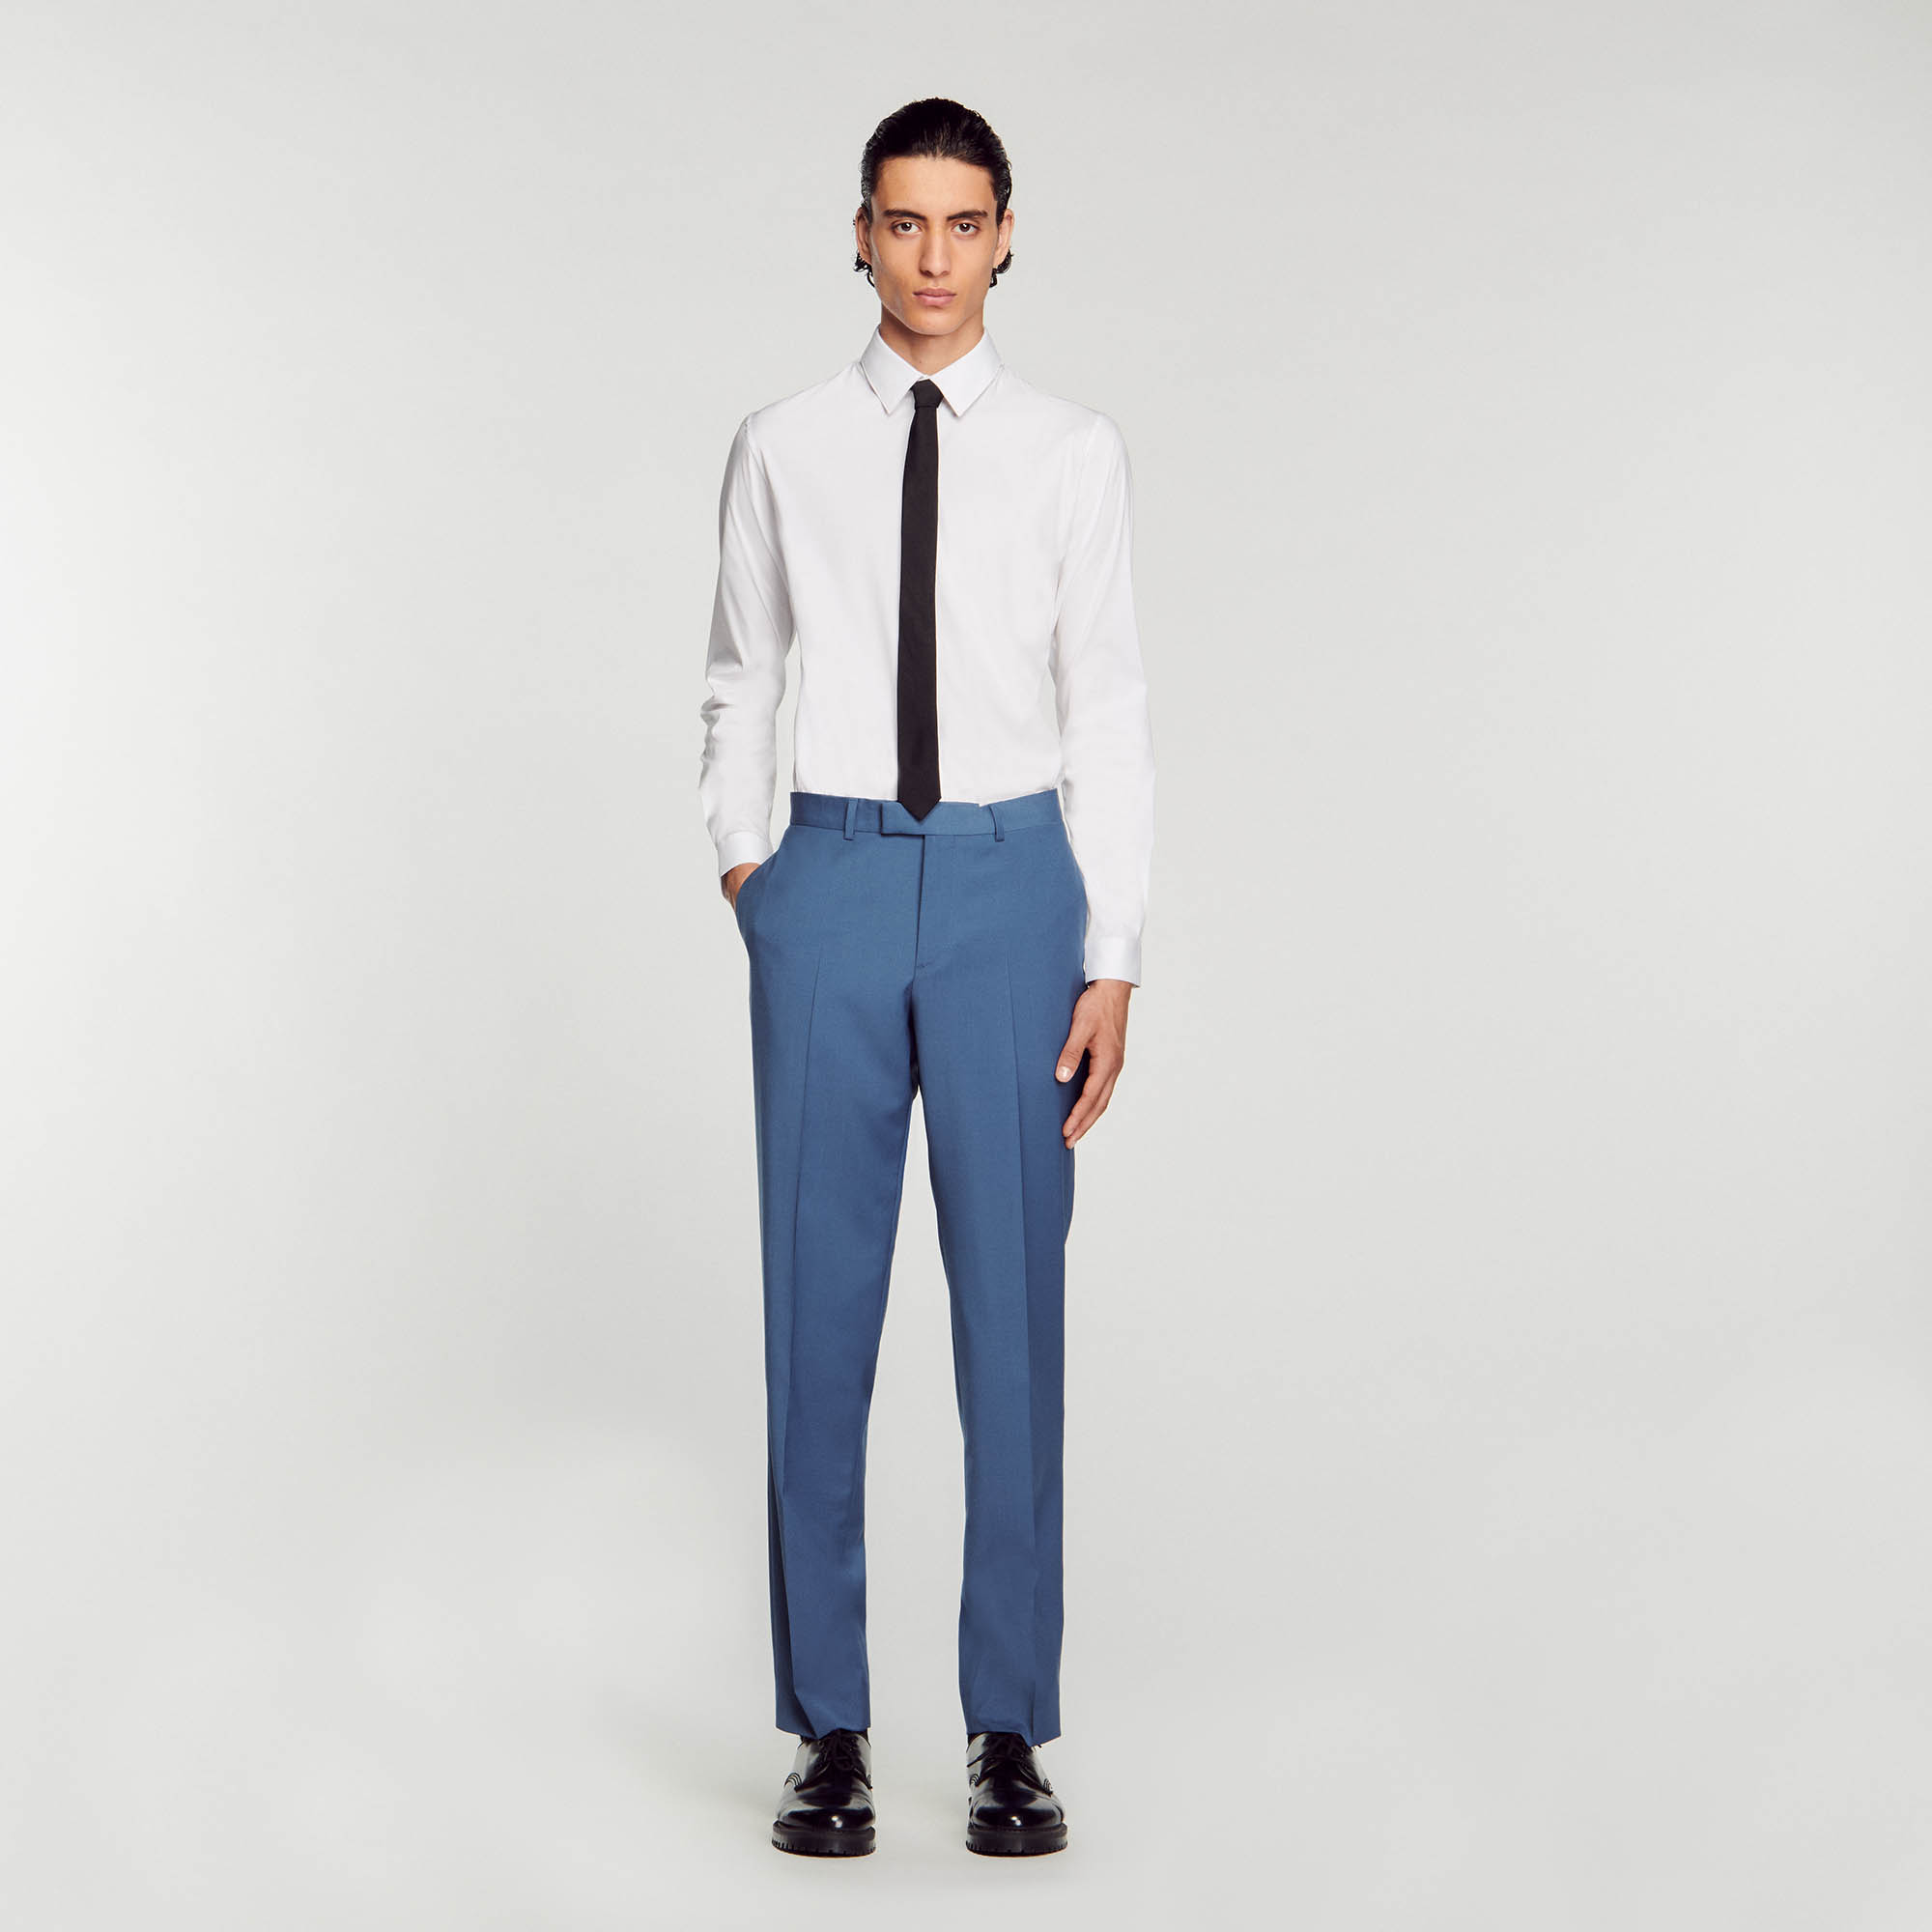 Sandro wool Classically tailored wool suit pants in an Italian fabric with side and back pockets